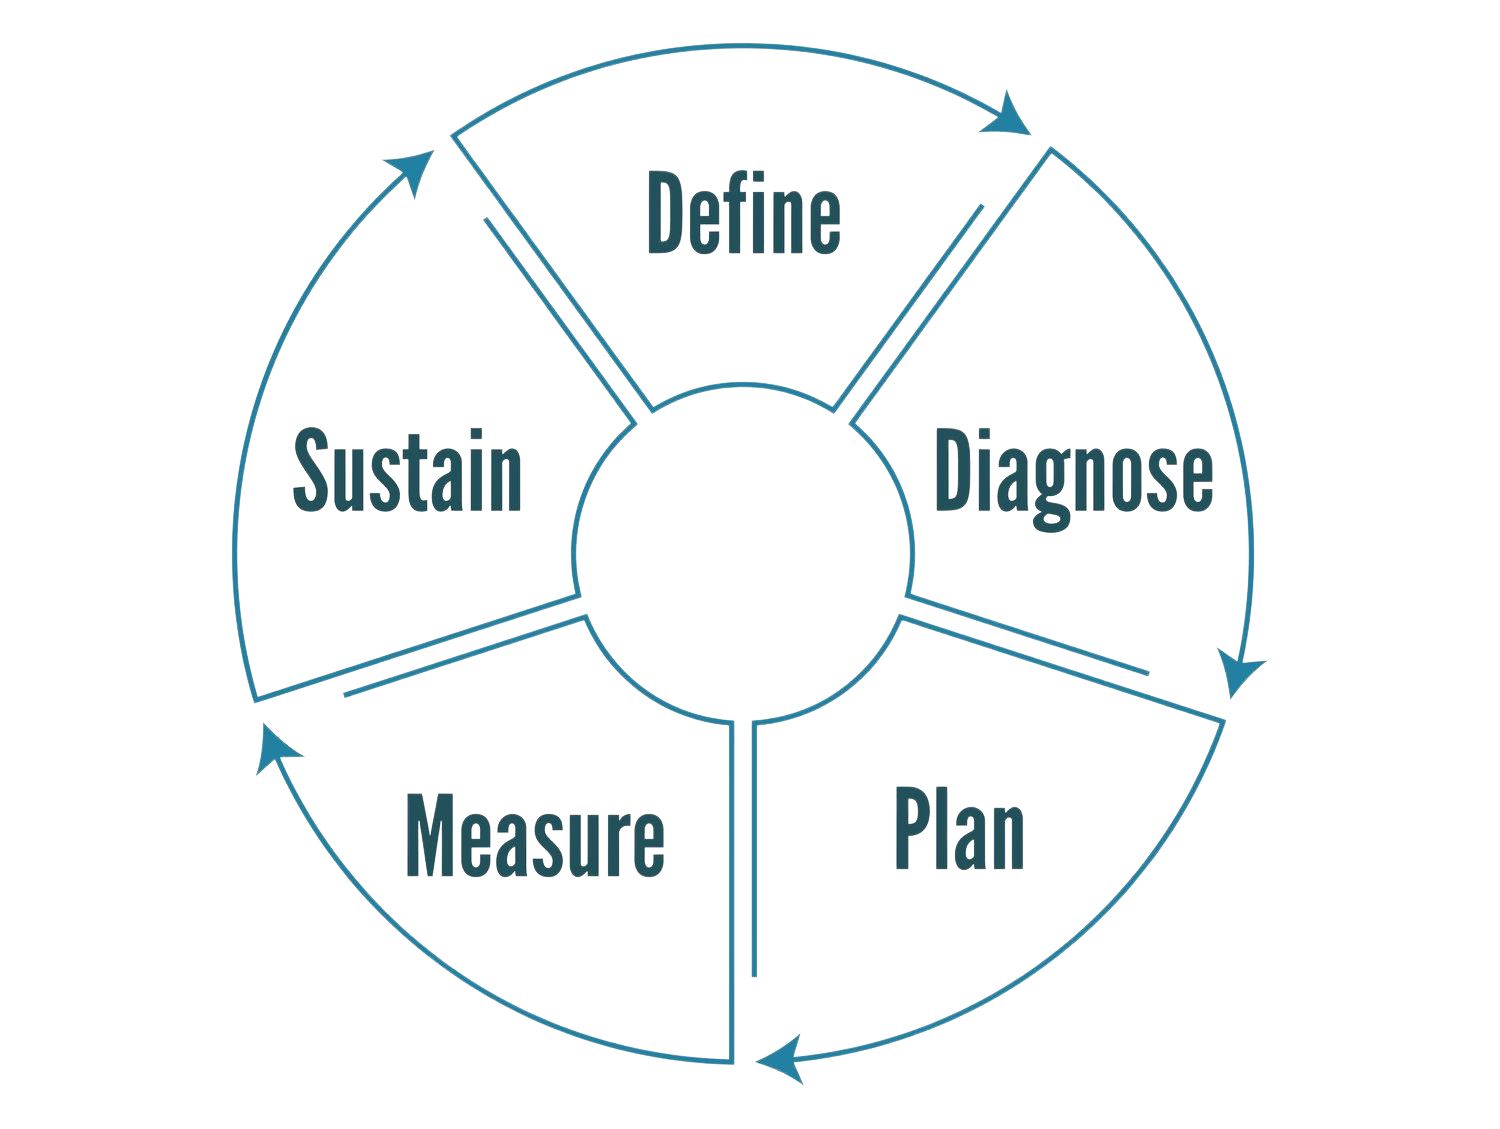 cycle image with the words define, diagnose, plan, measure, sustain